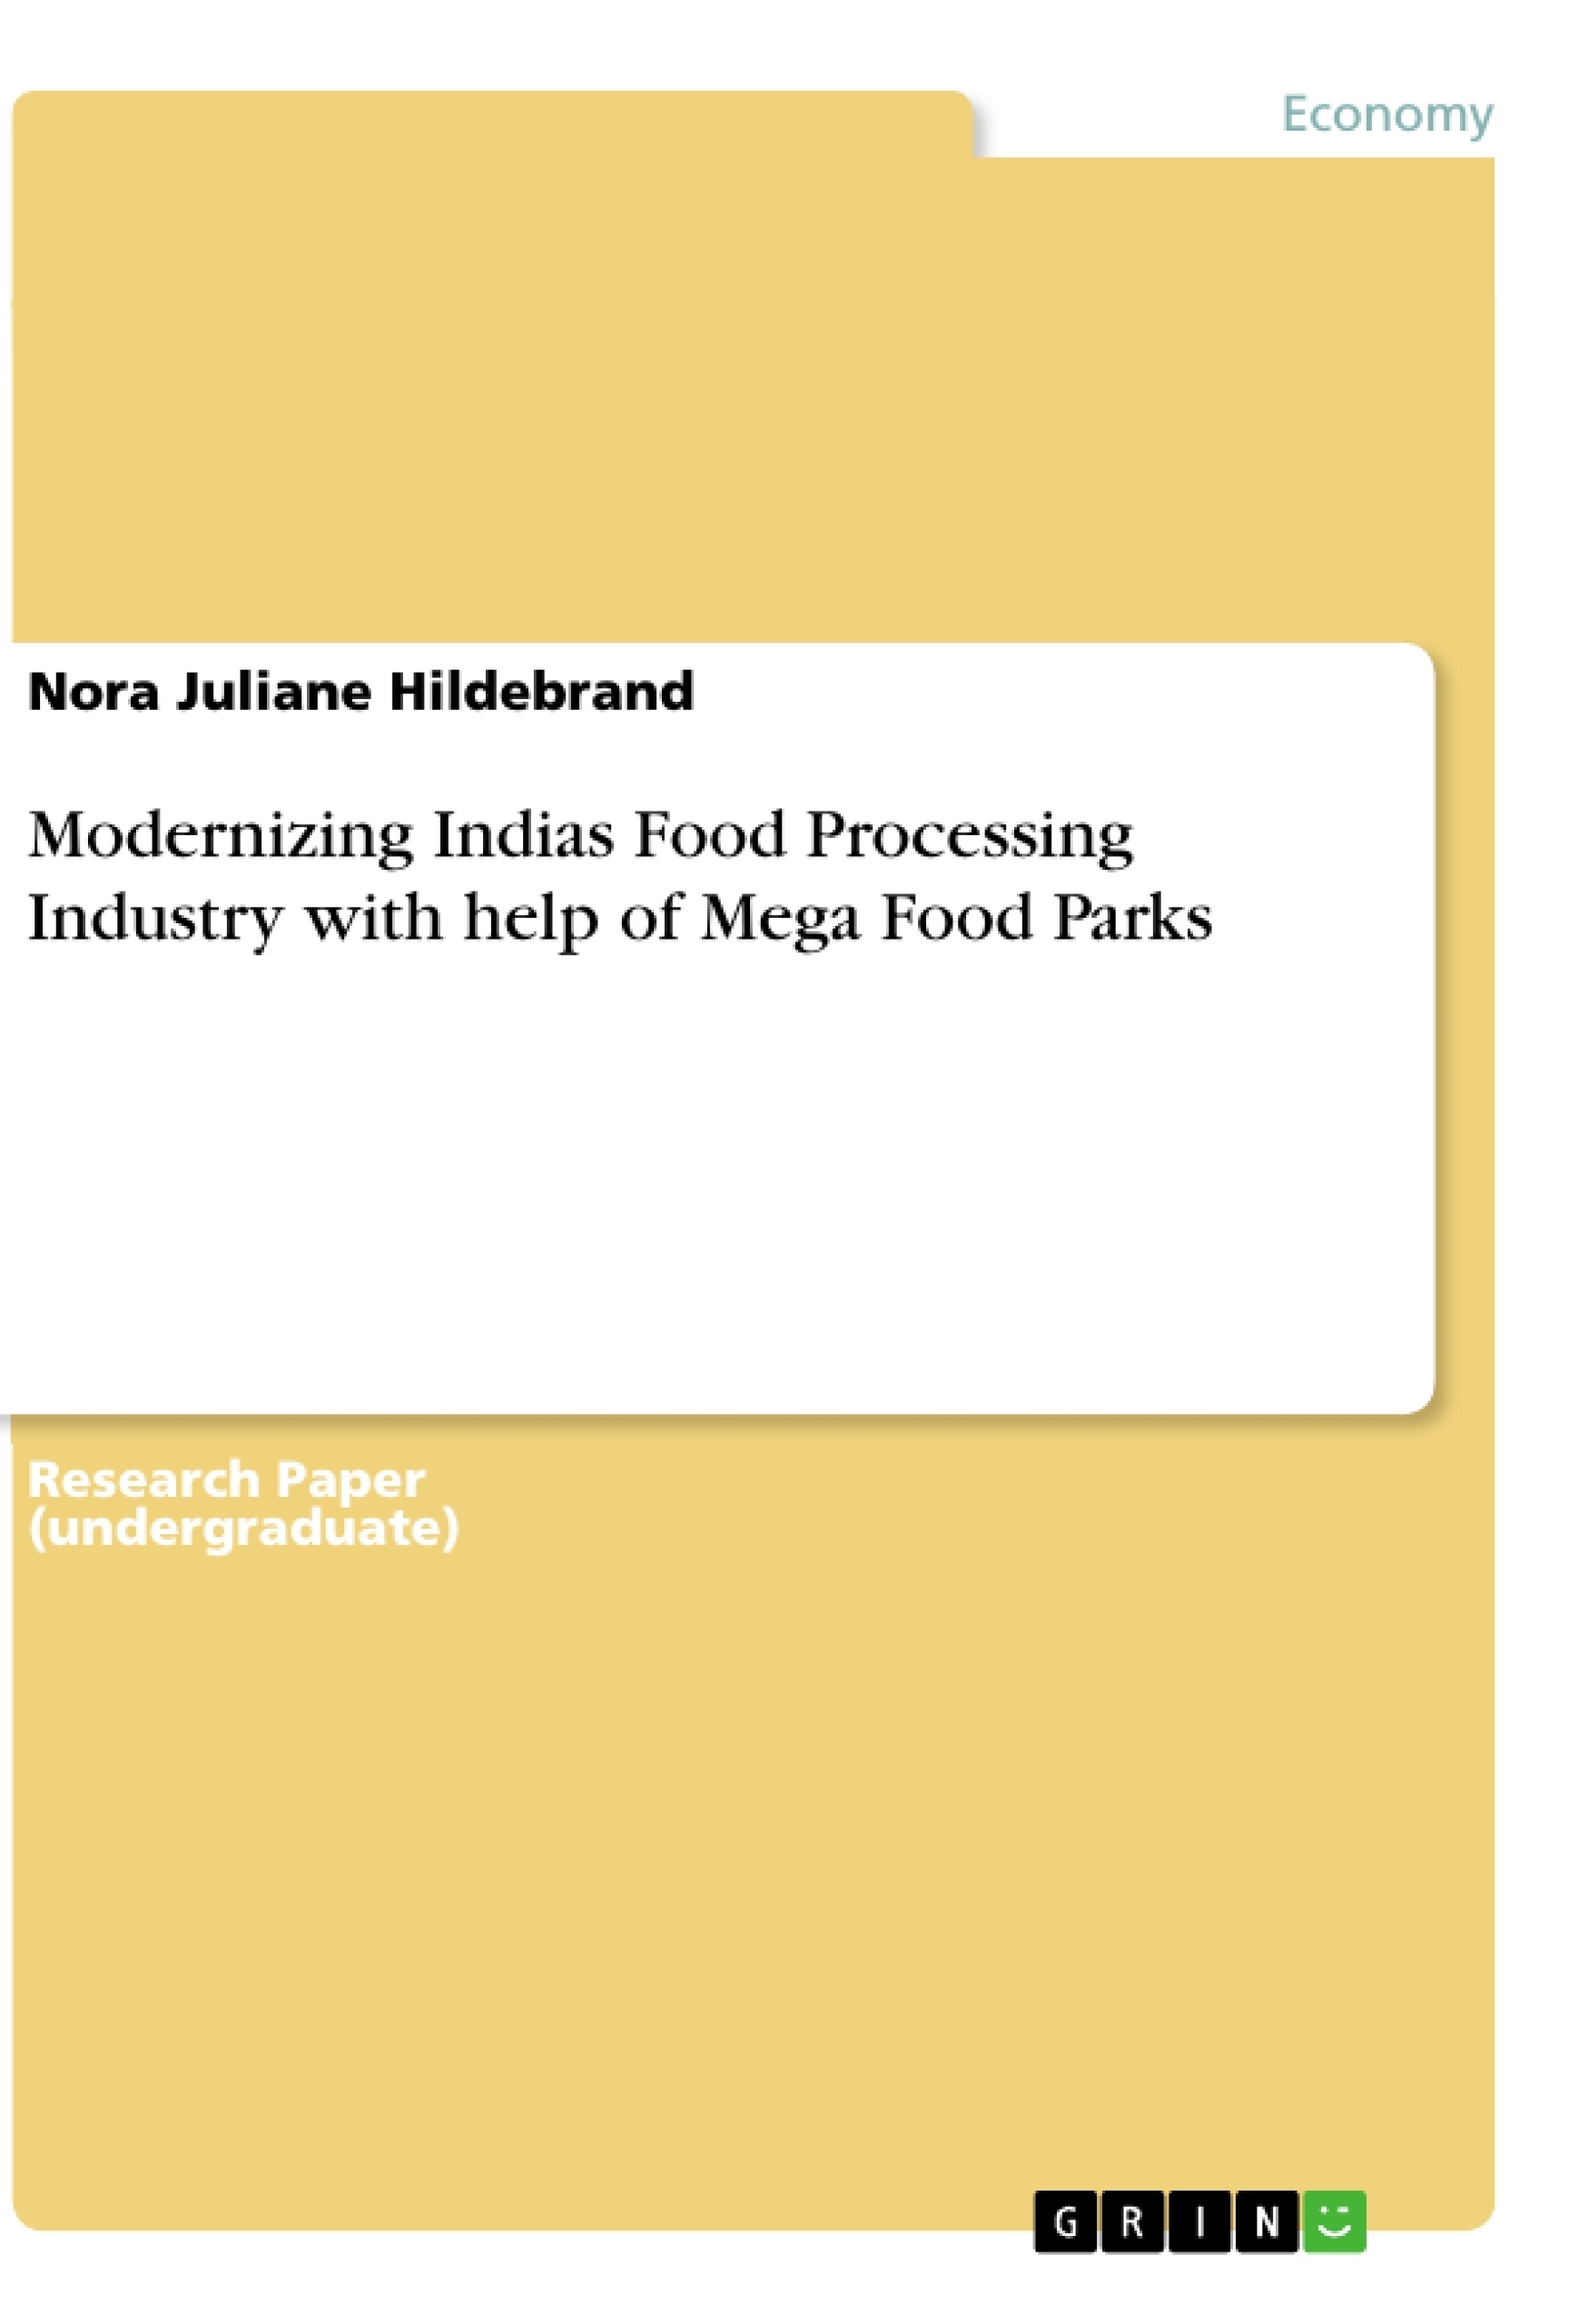 Title: Modernizing Indias Food Processing Industry with help of Mega Food Parks